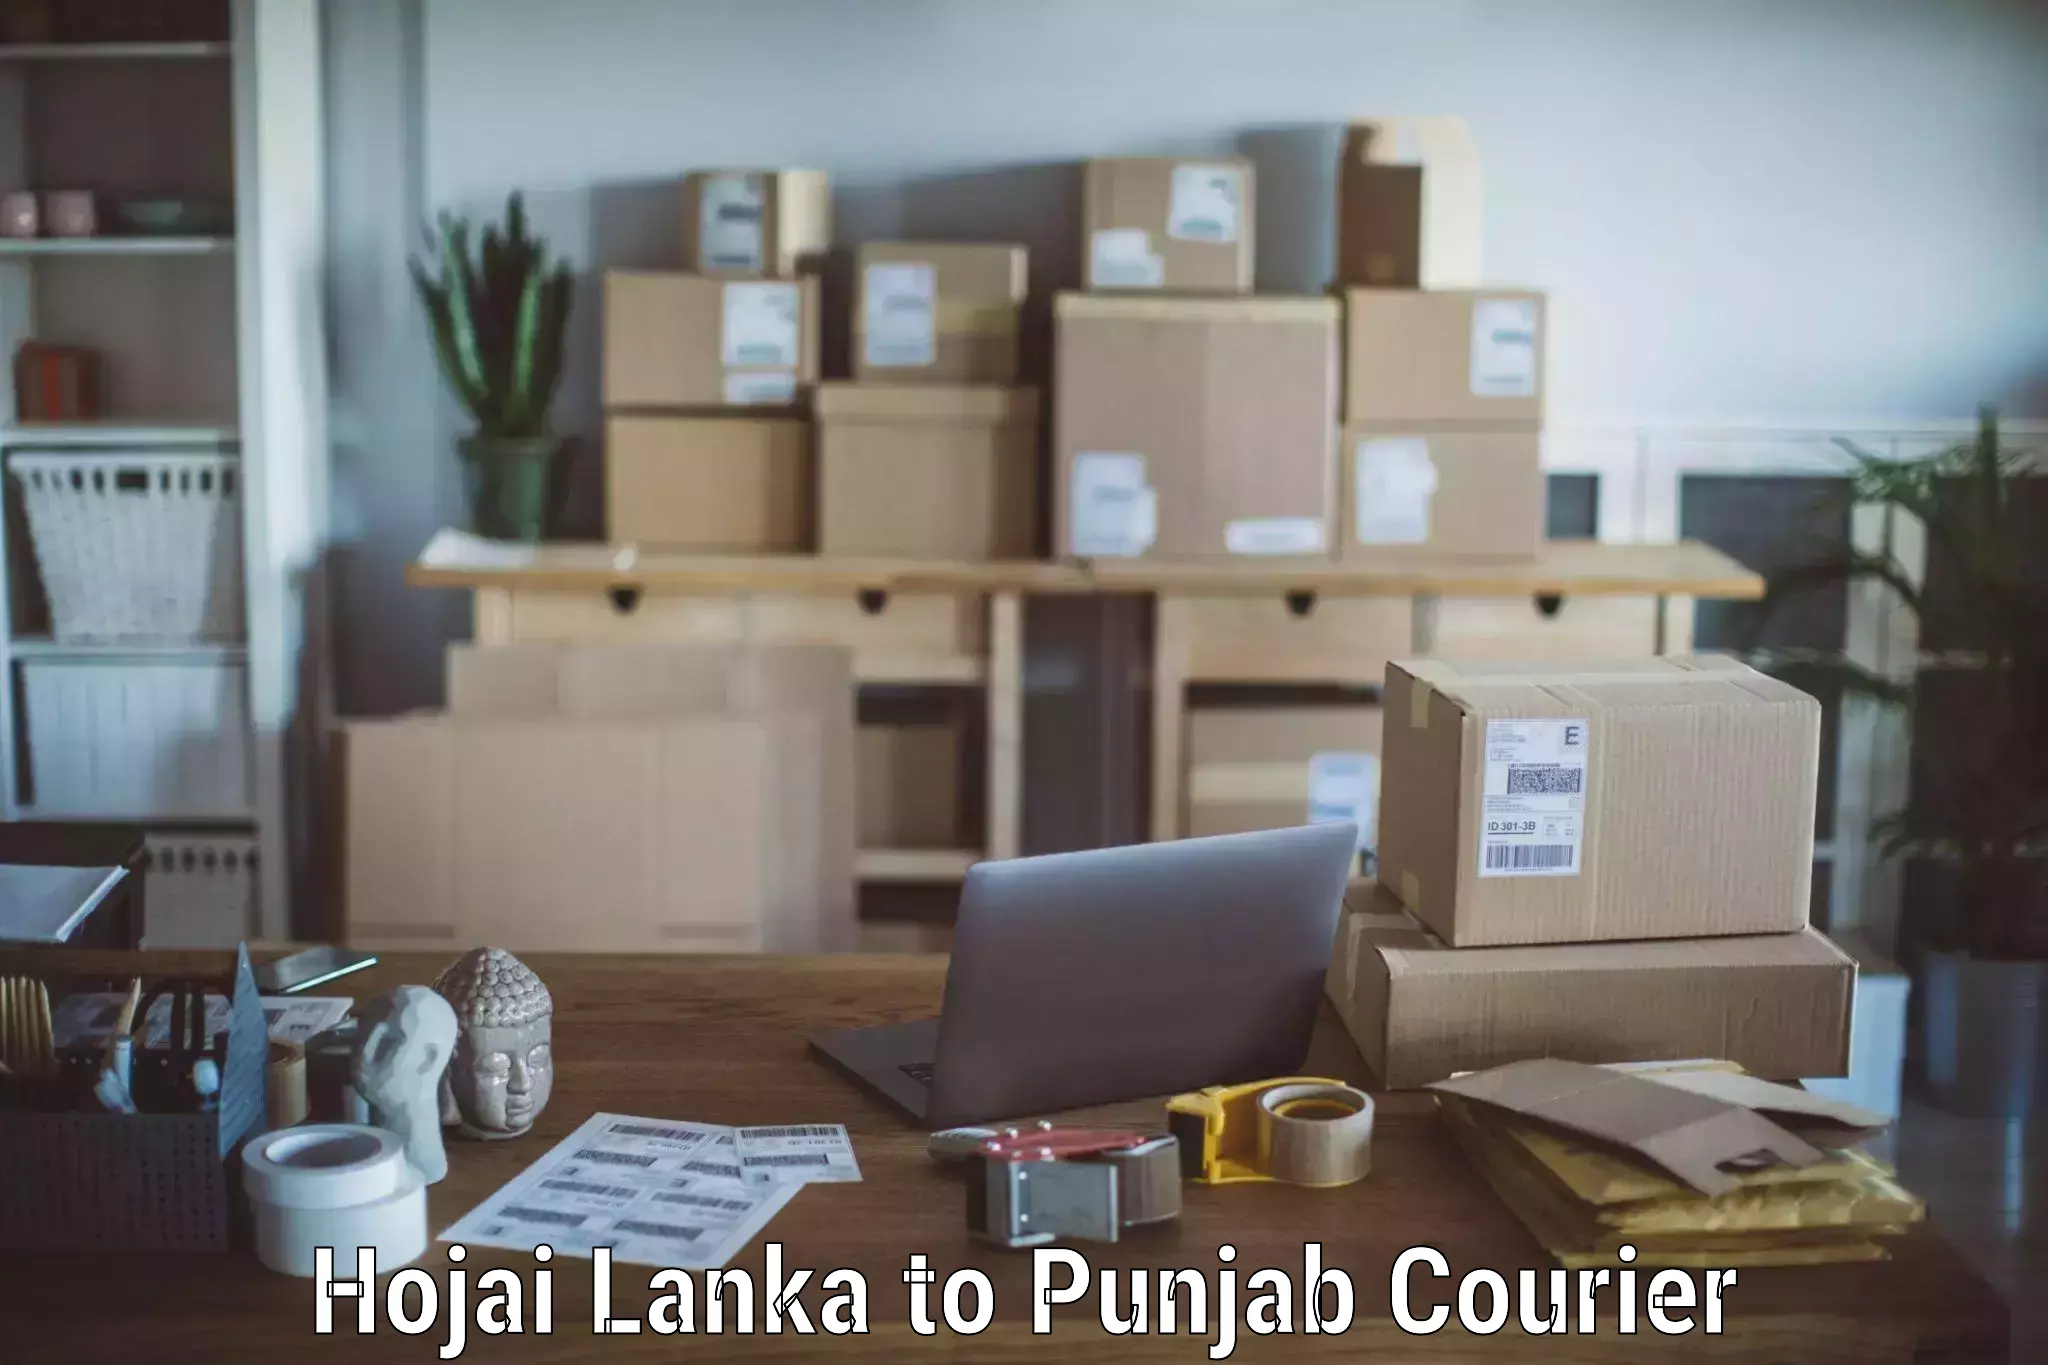 Furniture moving specialists Hojai Lanka to Patiala